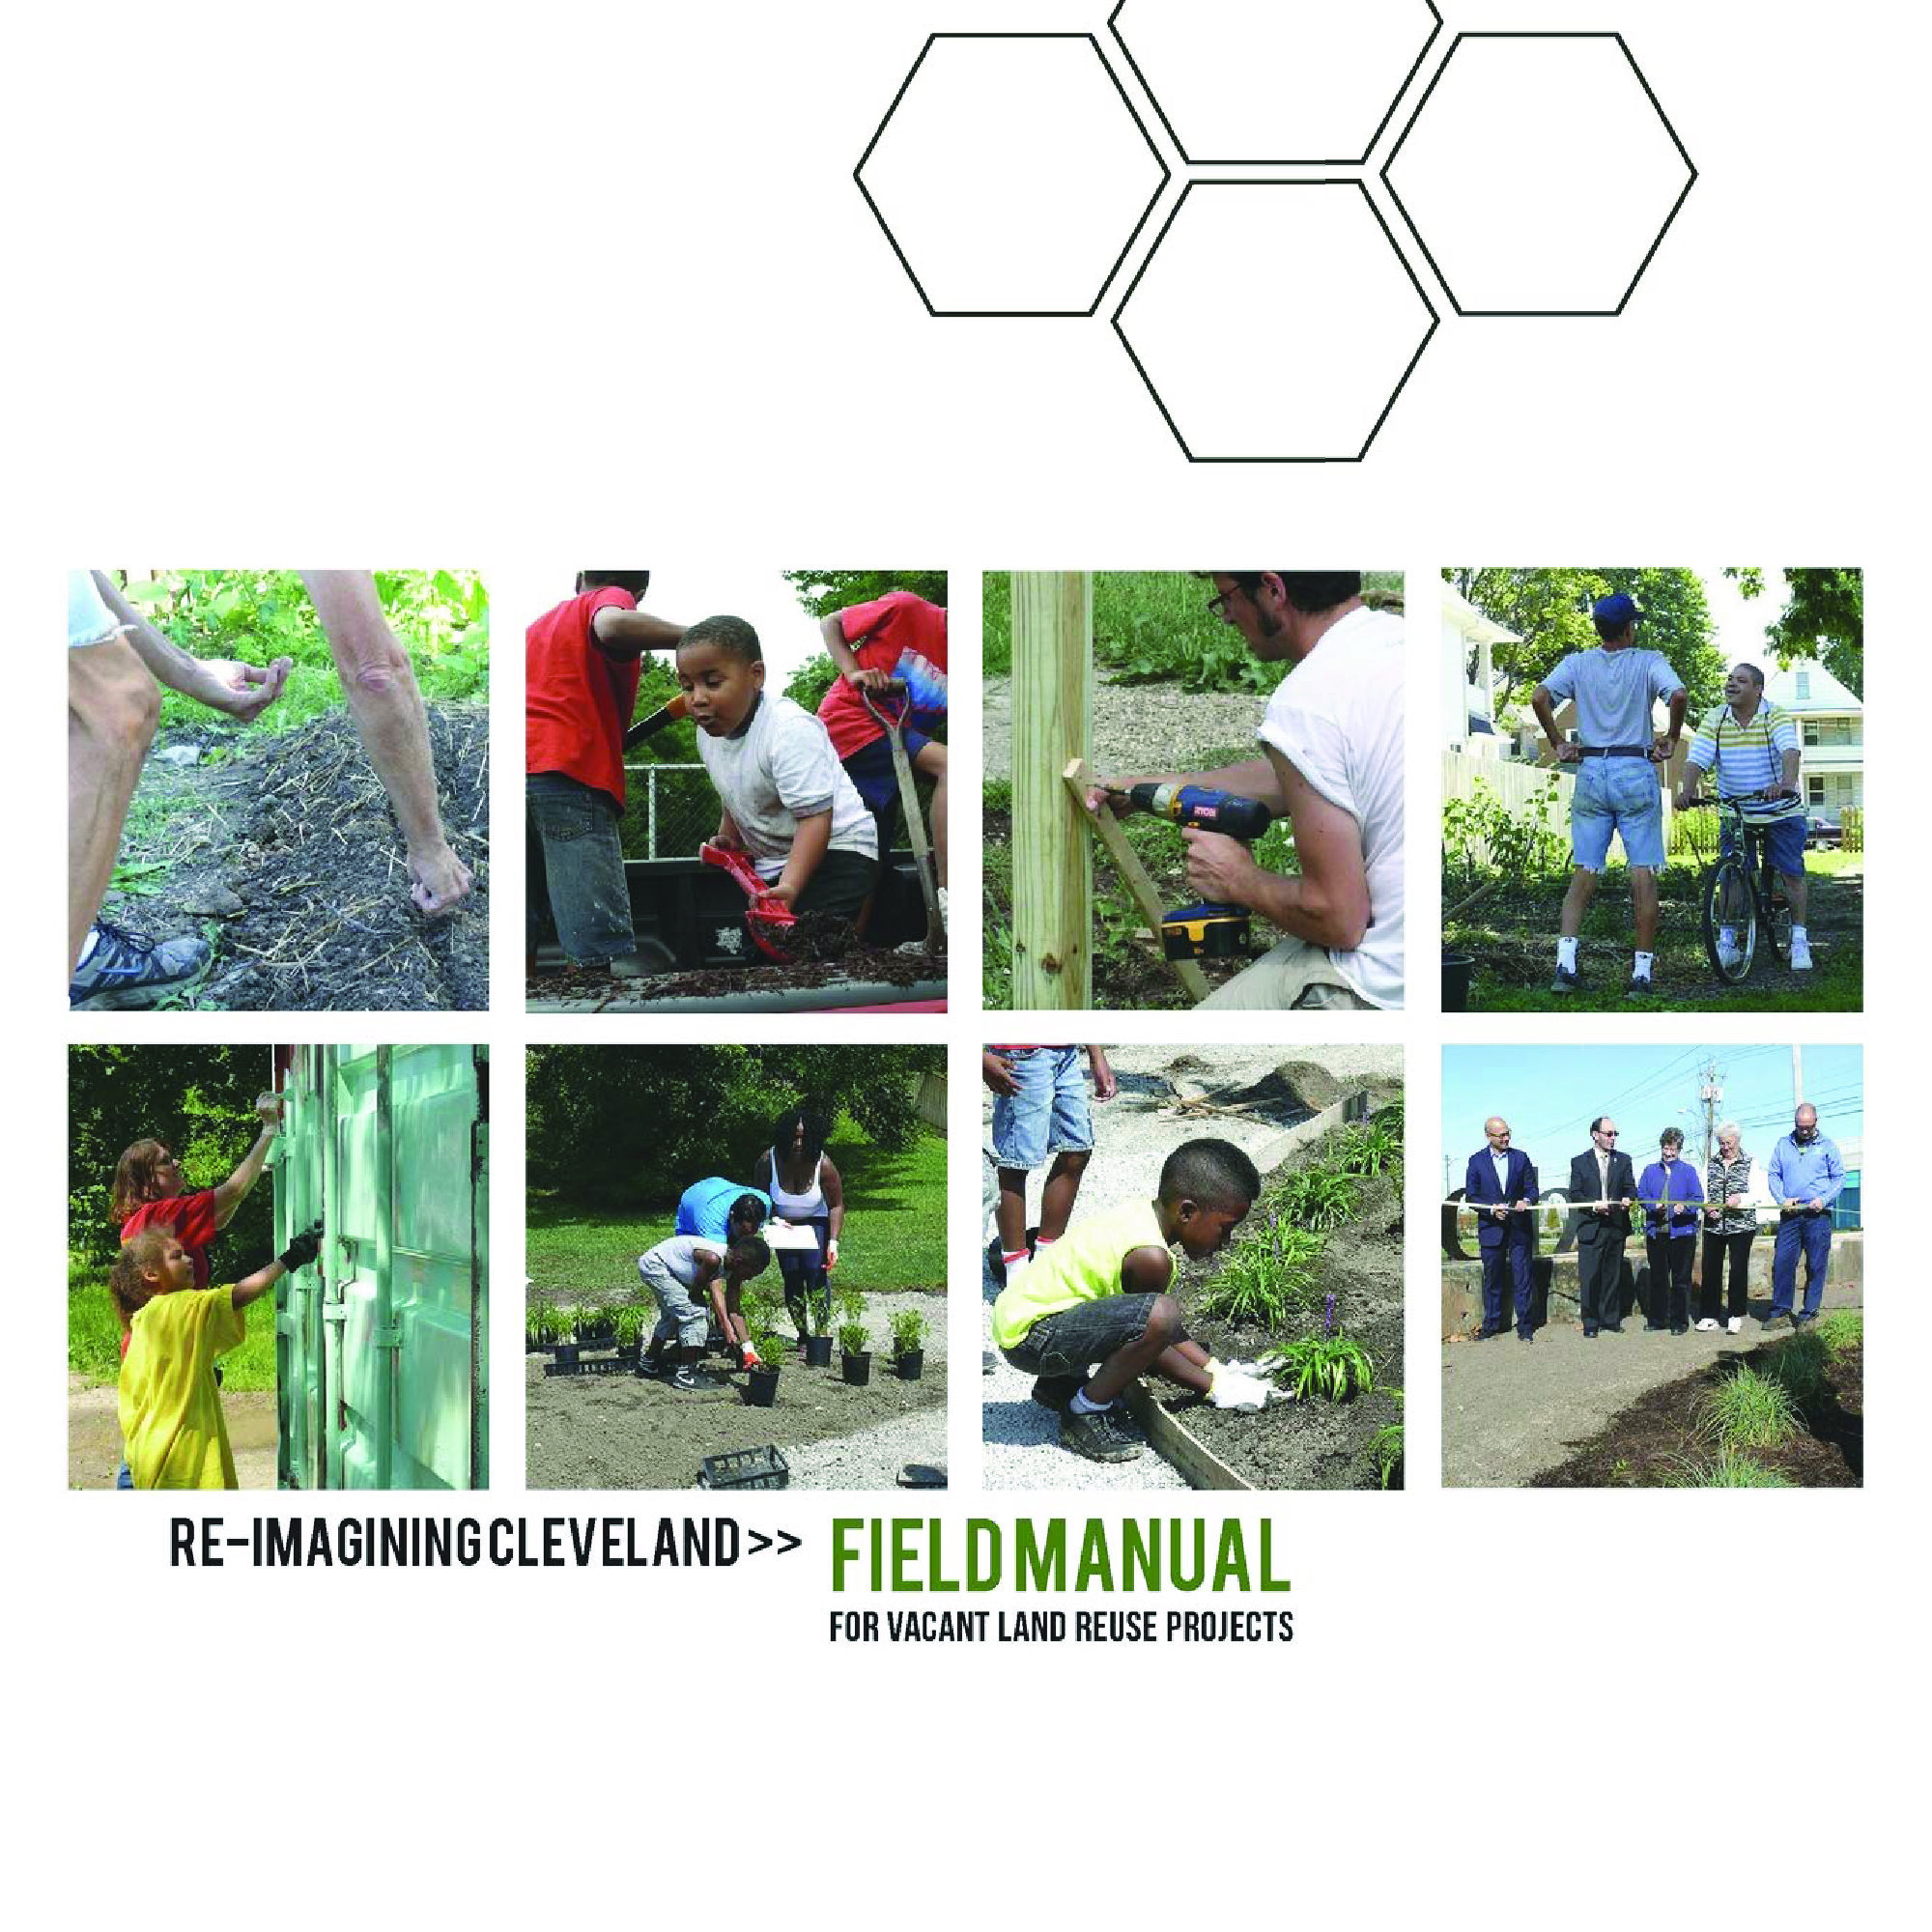 Re-Imagining Cleveland Field Manual for Vacant Land Reuse Projects